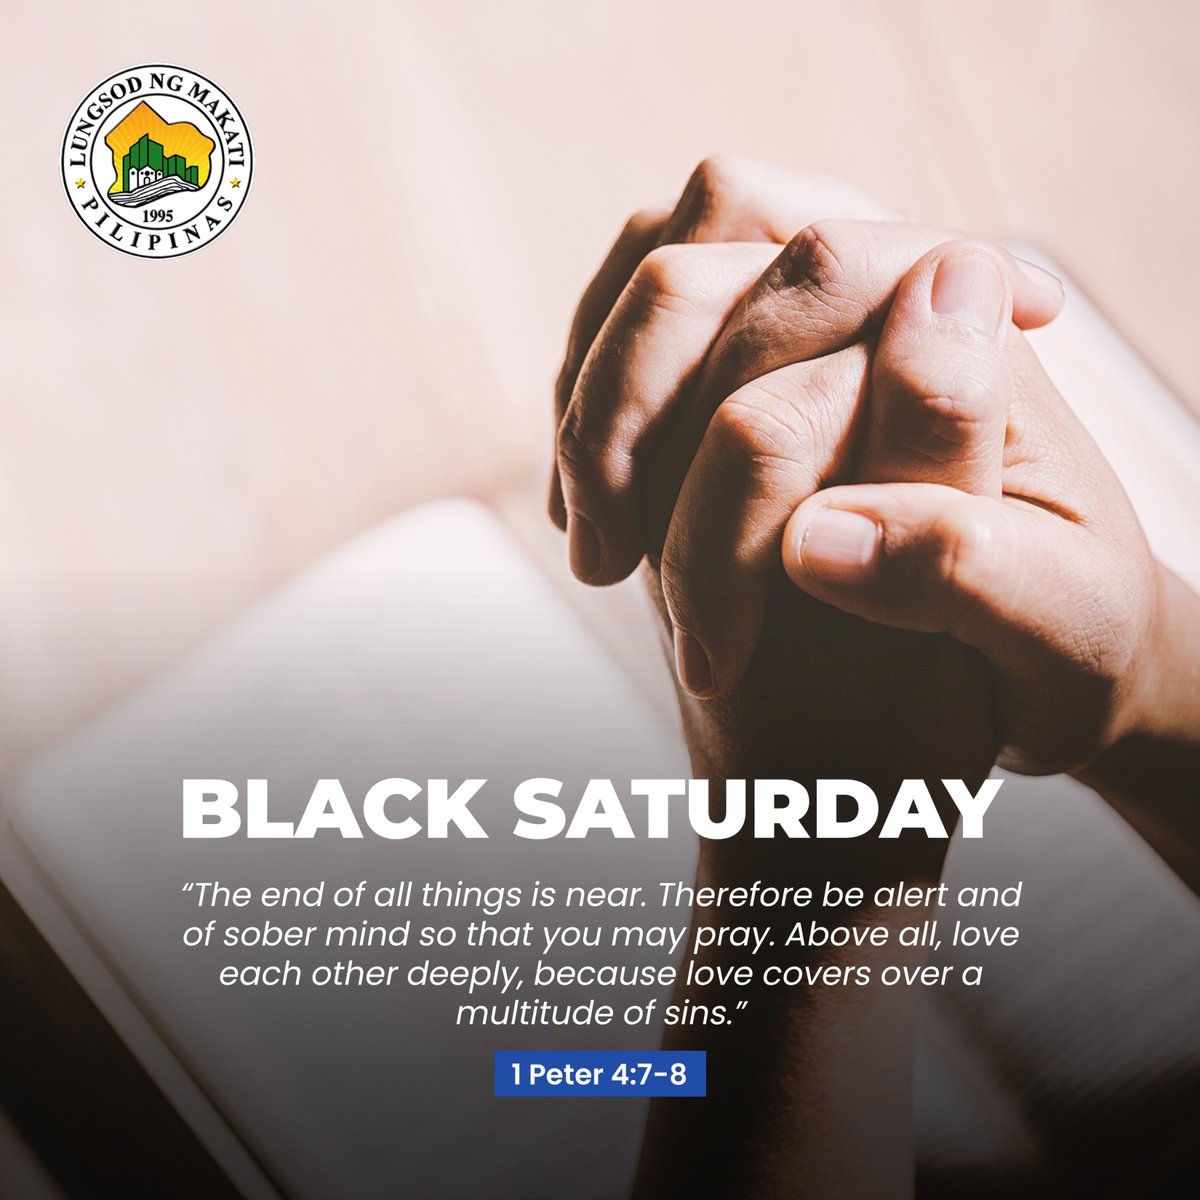 The end of all things is near. Therefore be alert and of sober mind so that you may pray. Above all, love each other deeply, because love covers over a multitude of sins. - 1 Peter 4:7-8

Let us all reflect on our actions this Black Saturday. Have a blessed day, #ProudMakatizens.